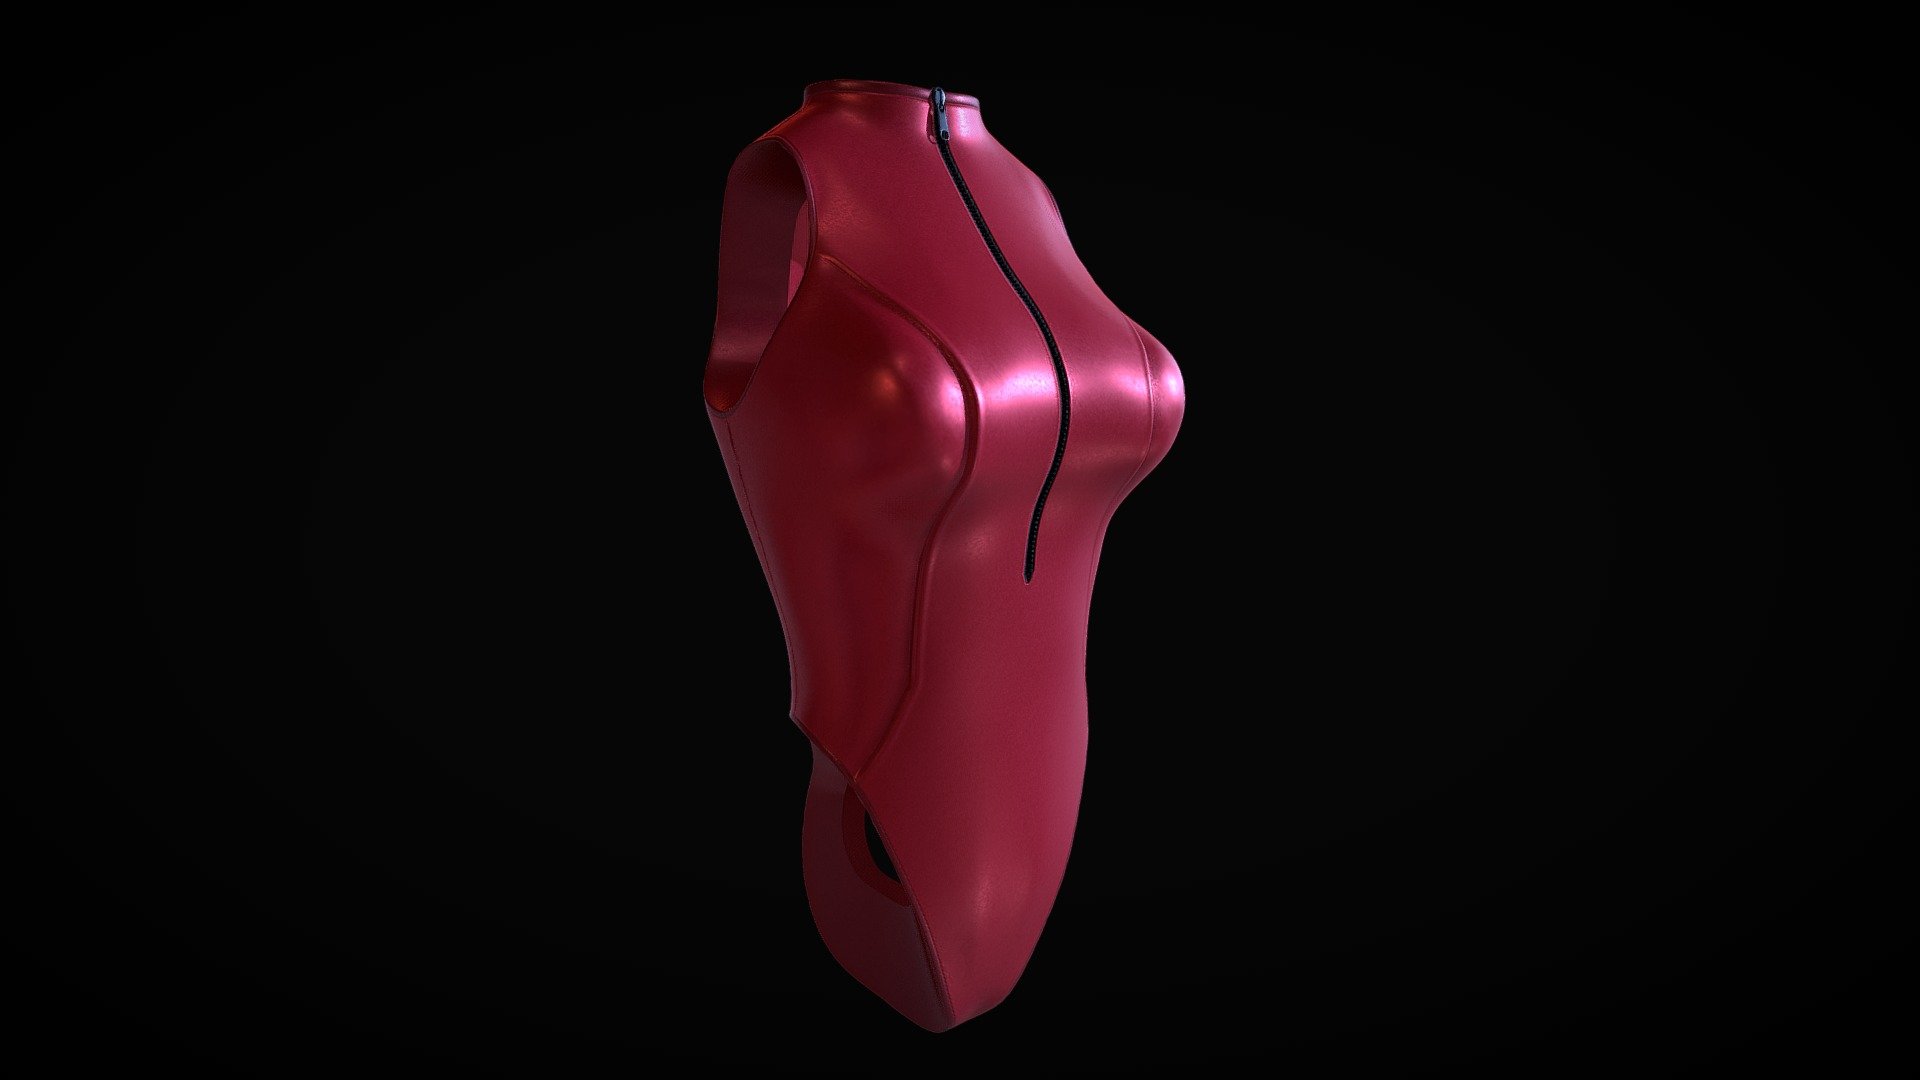 Cammy COS BodySuit

I made it in Blender &amp; Substance Painter.

I was limited to use 1024x1024 textures only 3d model